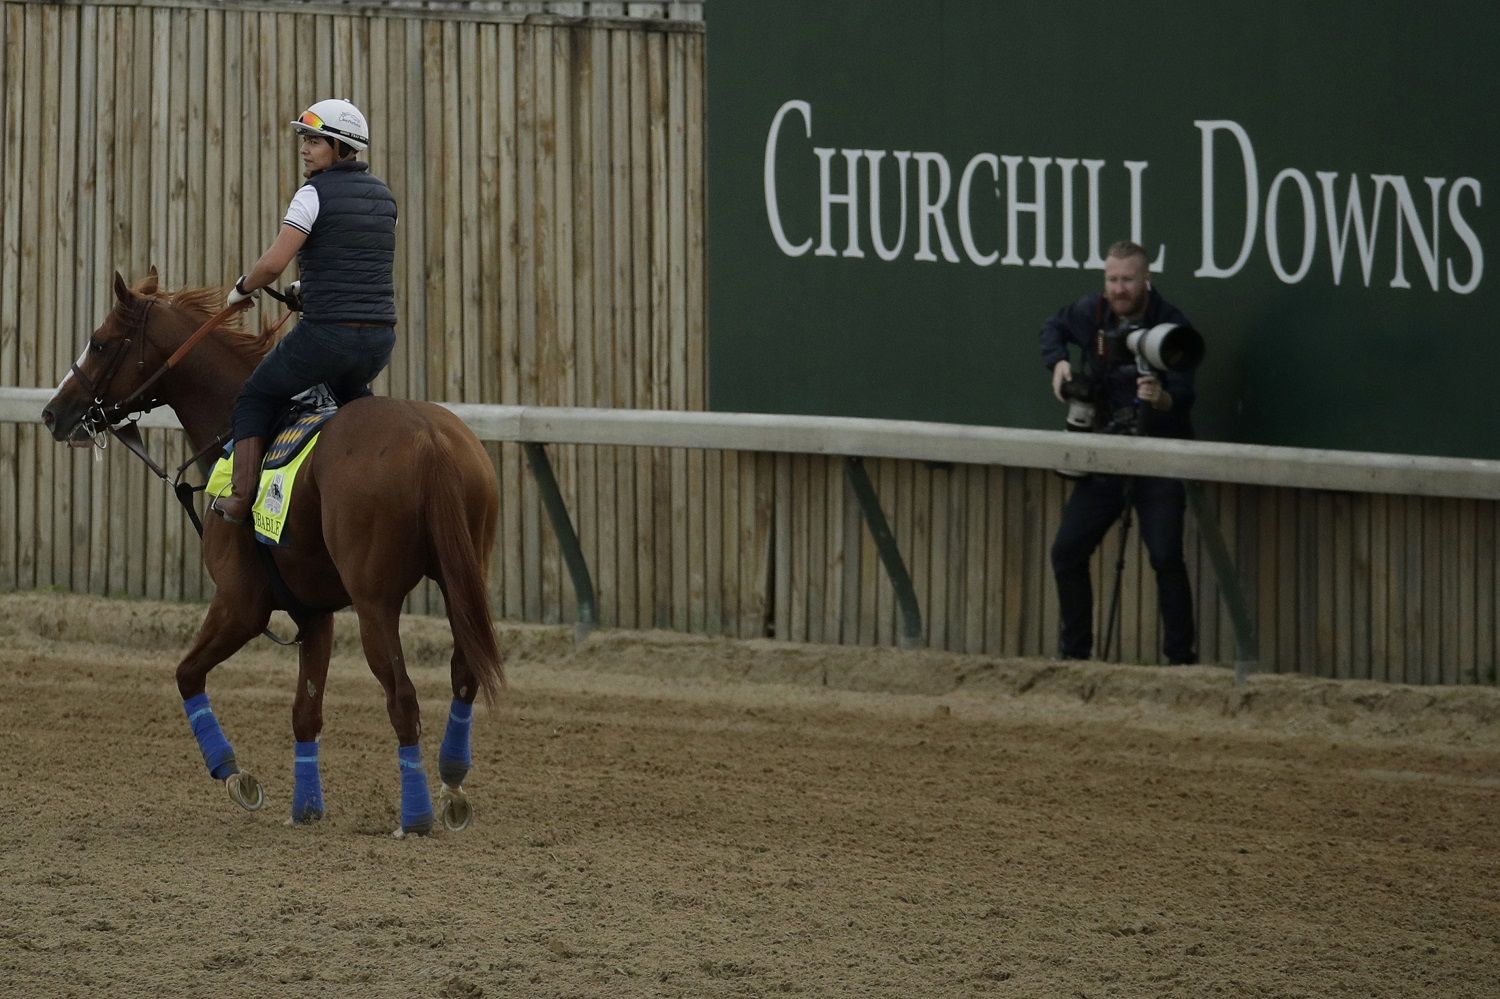 Kentucky Derby entrant Improbable is ridden during a workout at Churchill Downs Wednesday, May 1, 2019, in Louisville, Ky. The 145th running of the Kentucky Derby is scheduled for Saturday, May 4. (AP Photo/Charlie Riedel)